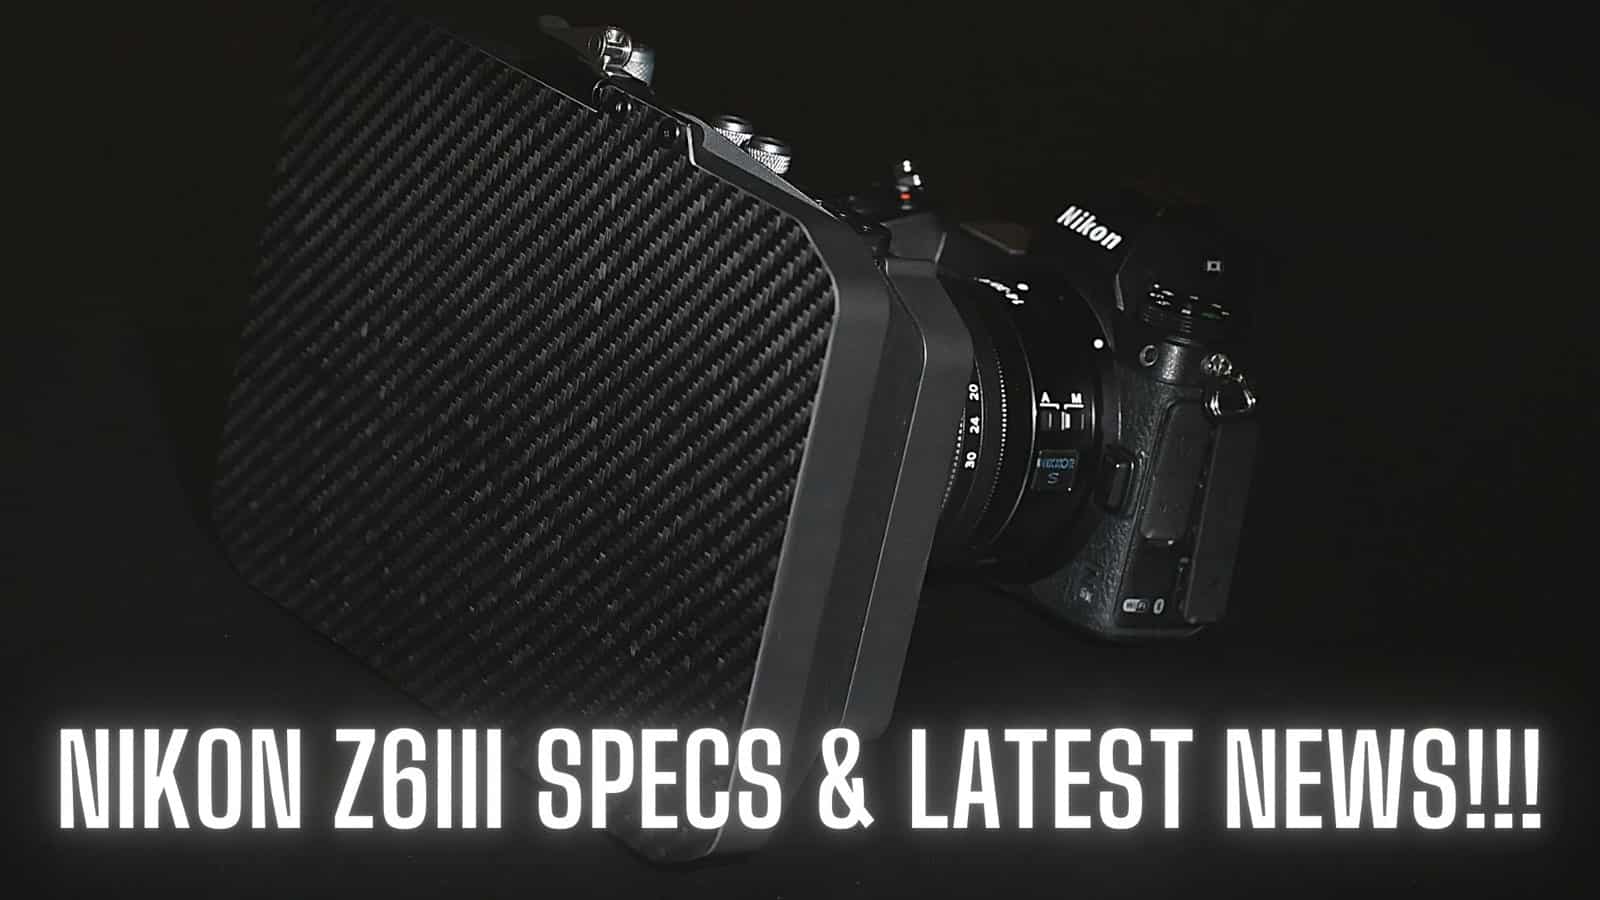 Nikon Z6iii specifications and release date